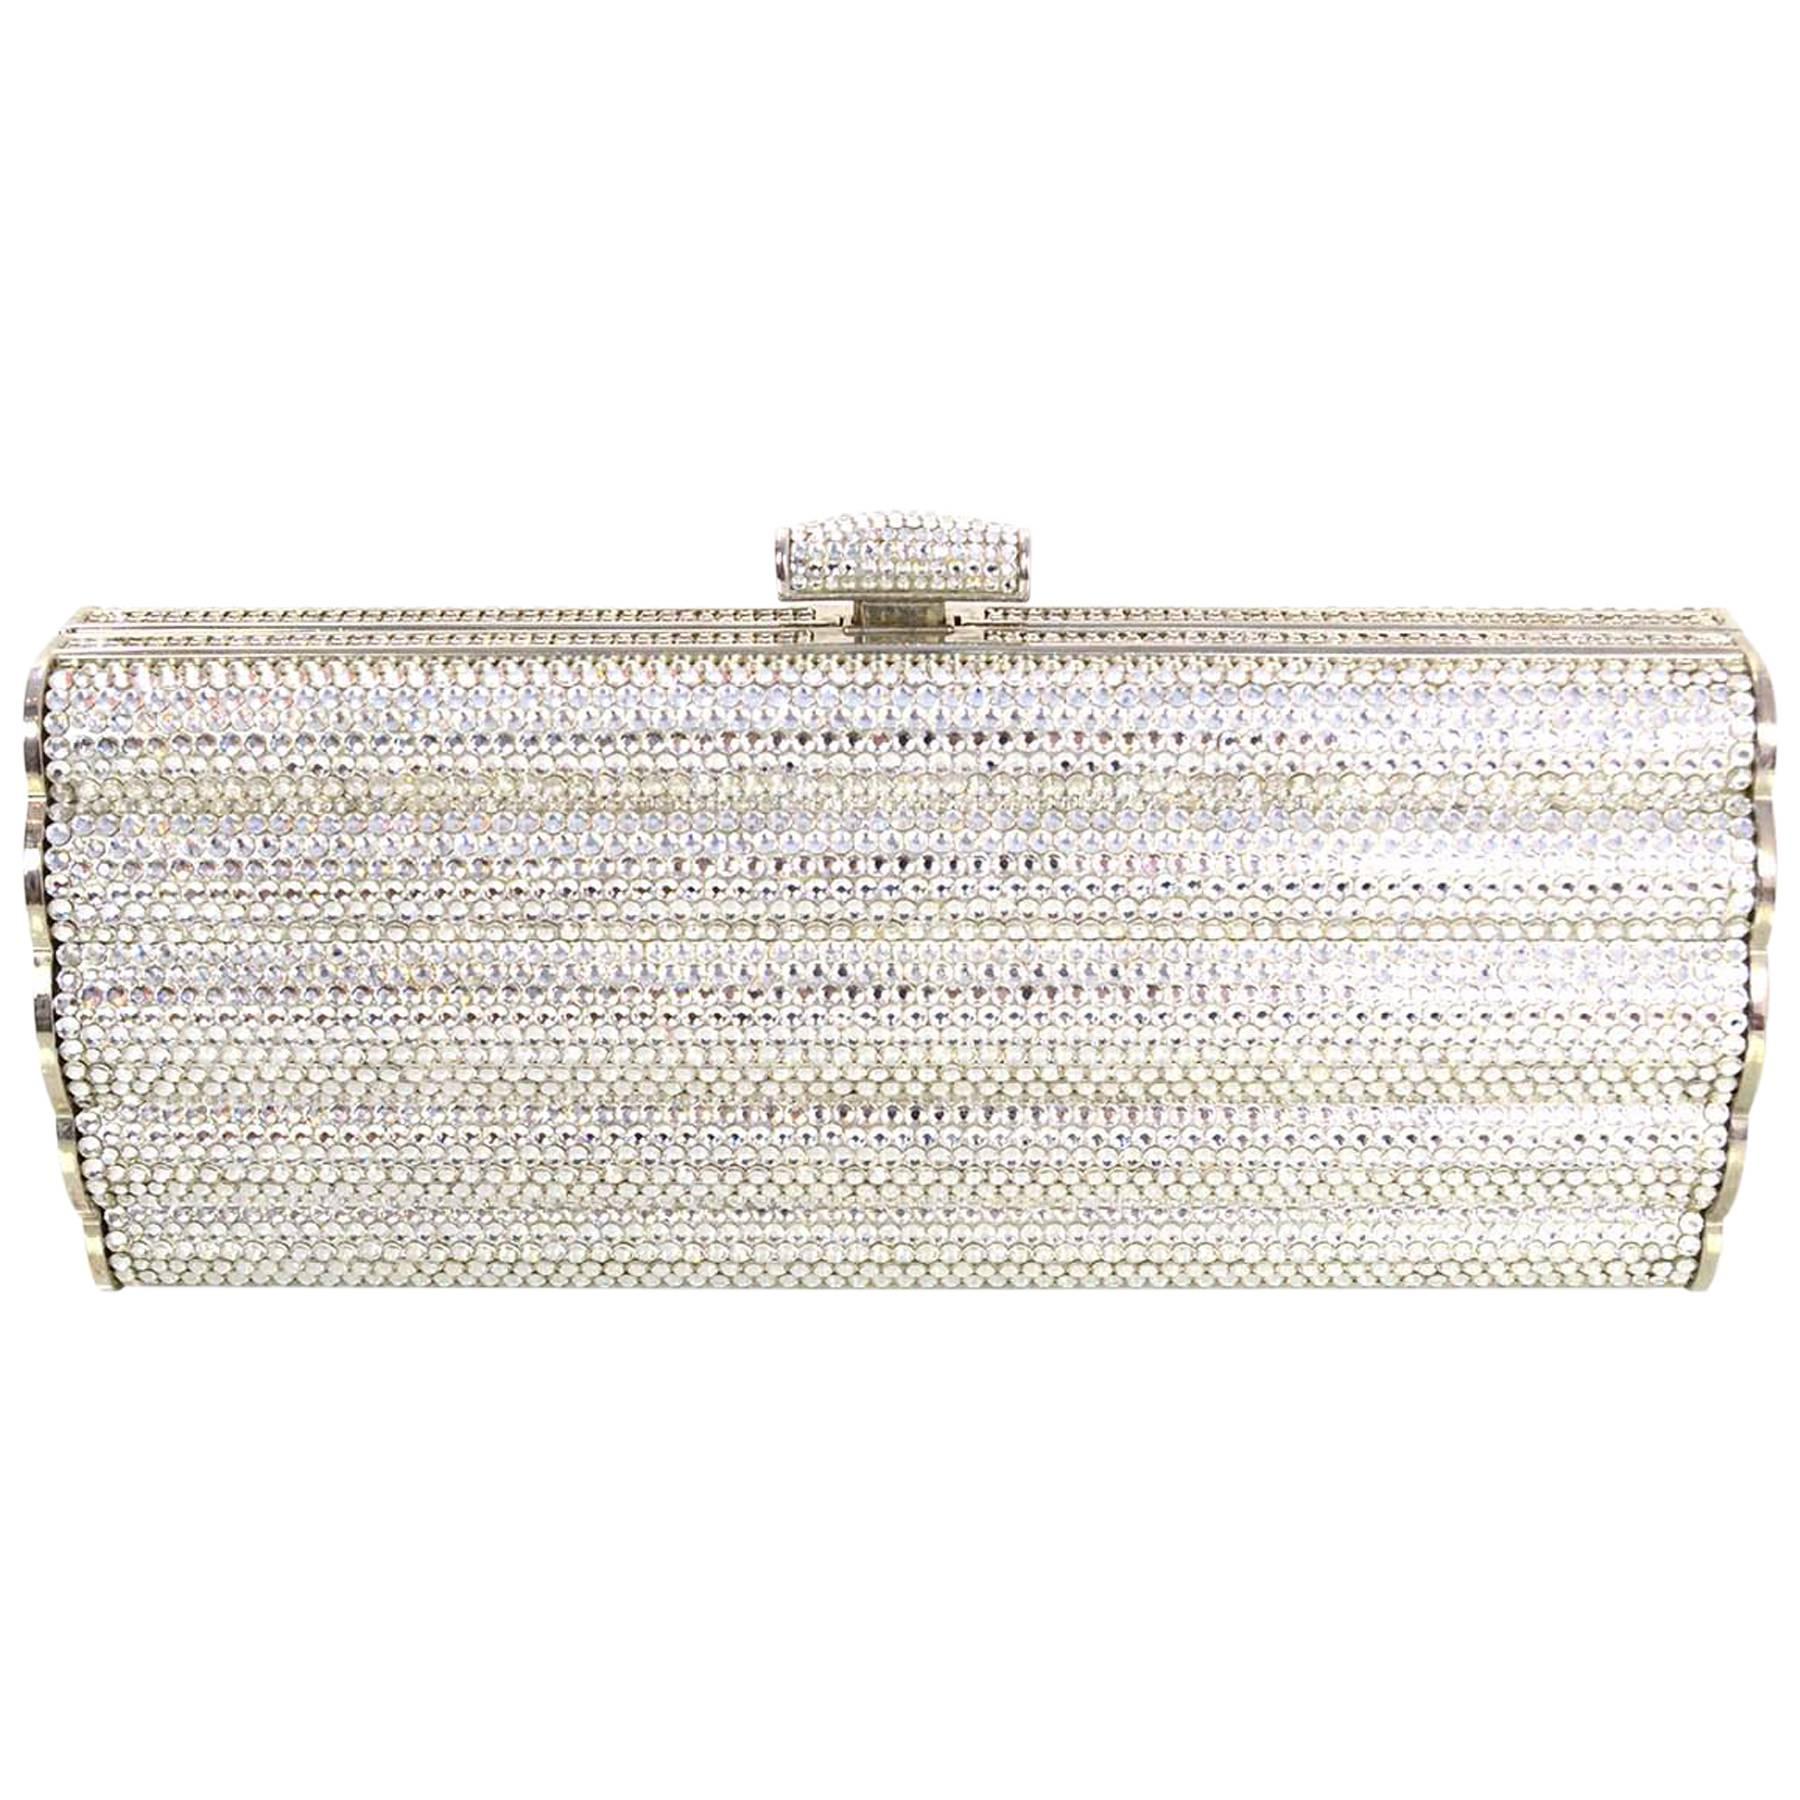 Judith Leiber Pave Crystal Miniaudiere Clutch Bag w/ Shoulder Chain